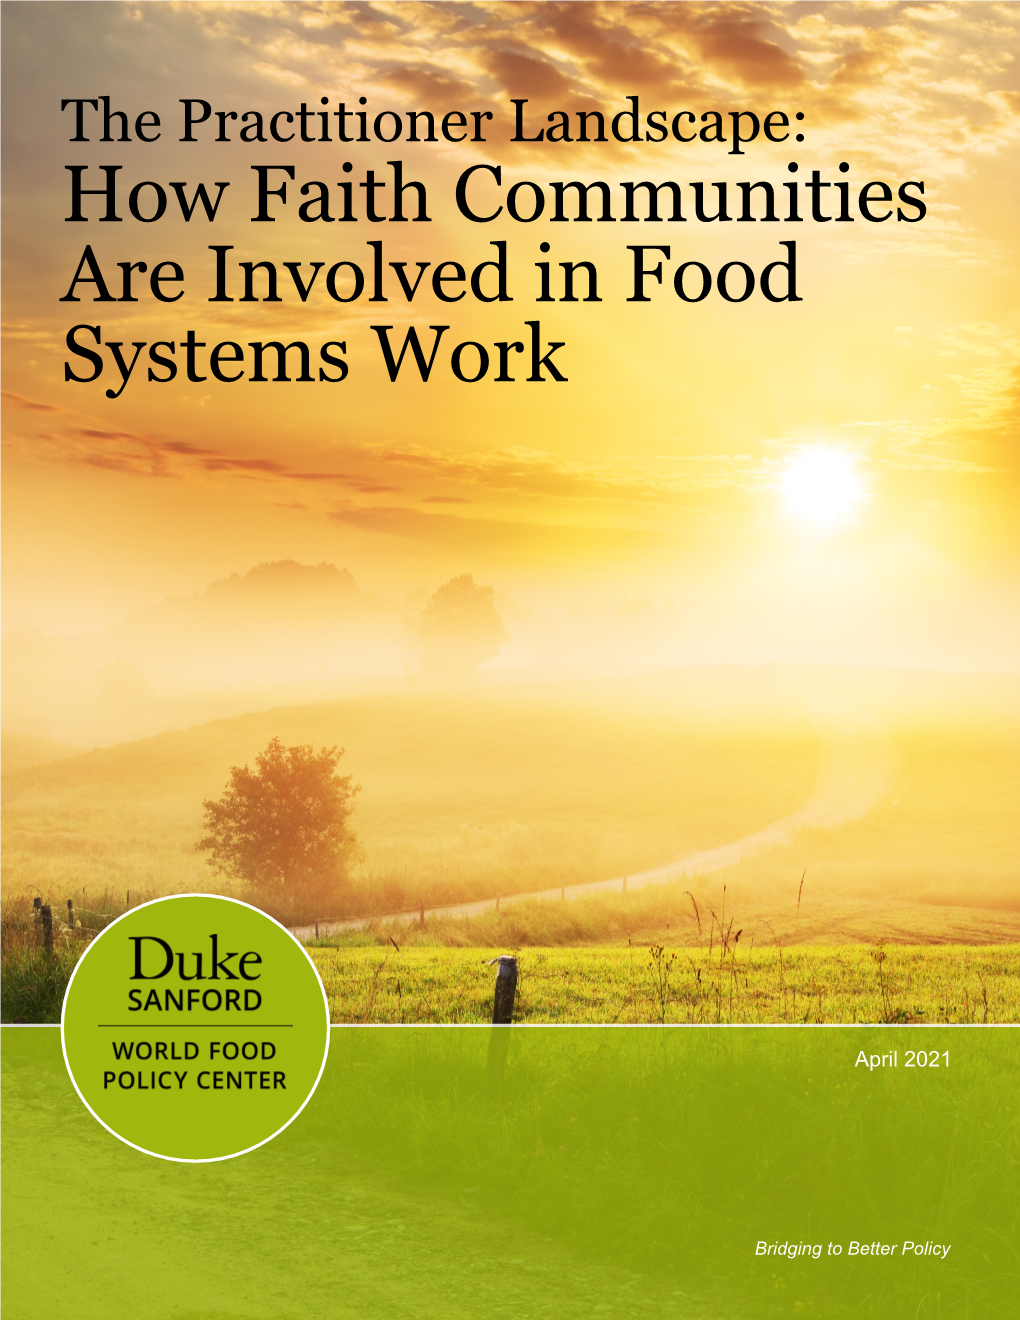 How Faith Communities Are Involved in Food Systems Work